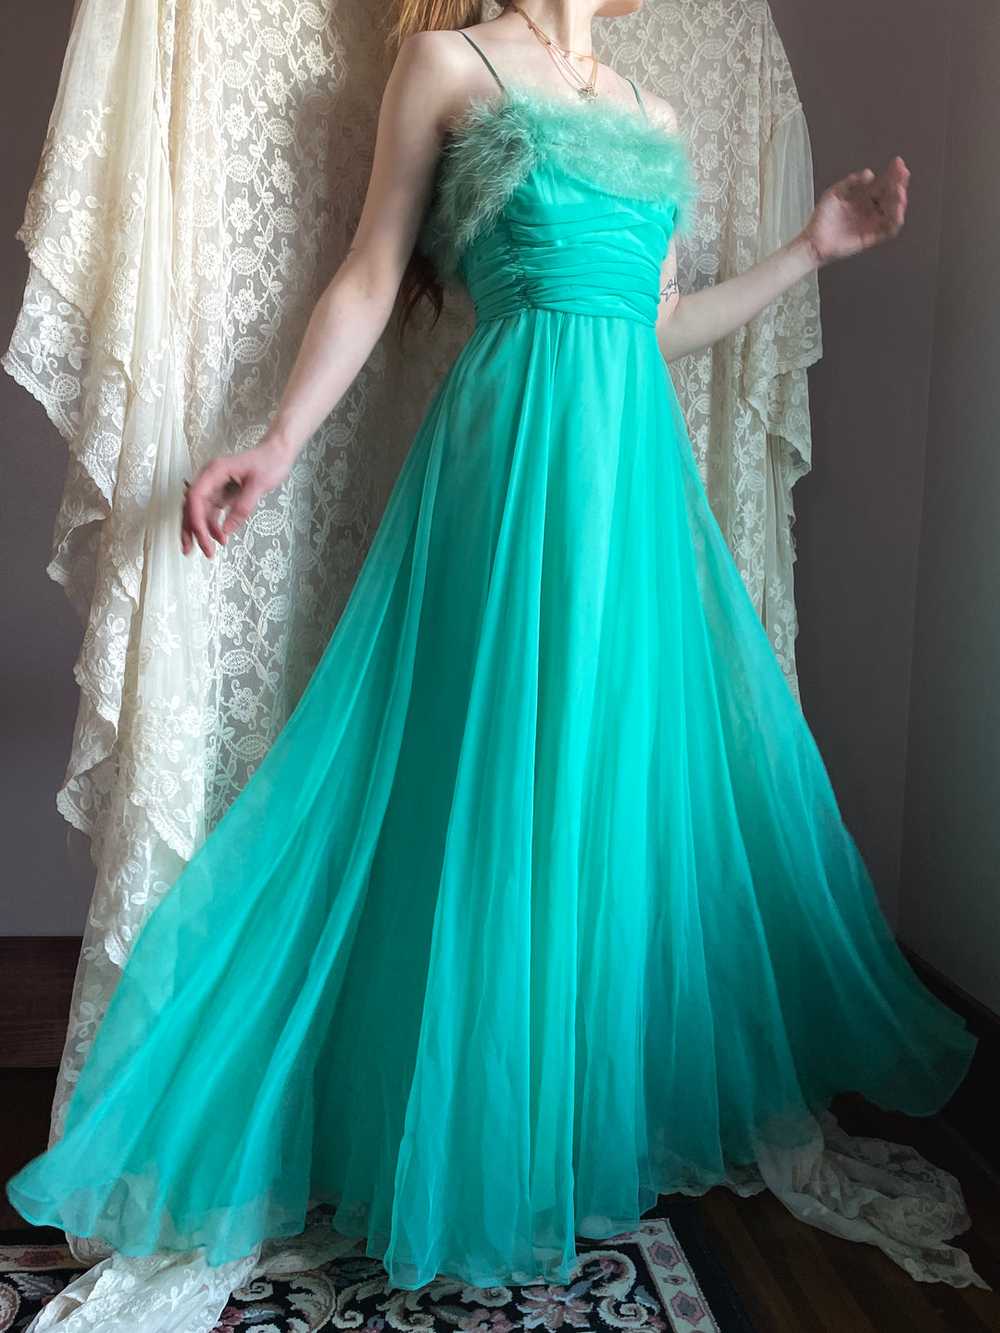 1960s Marabou Feather Green Chiffon Gown Dress - image 1